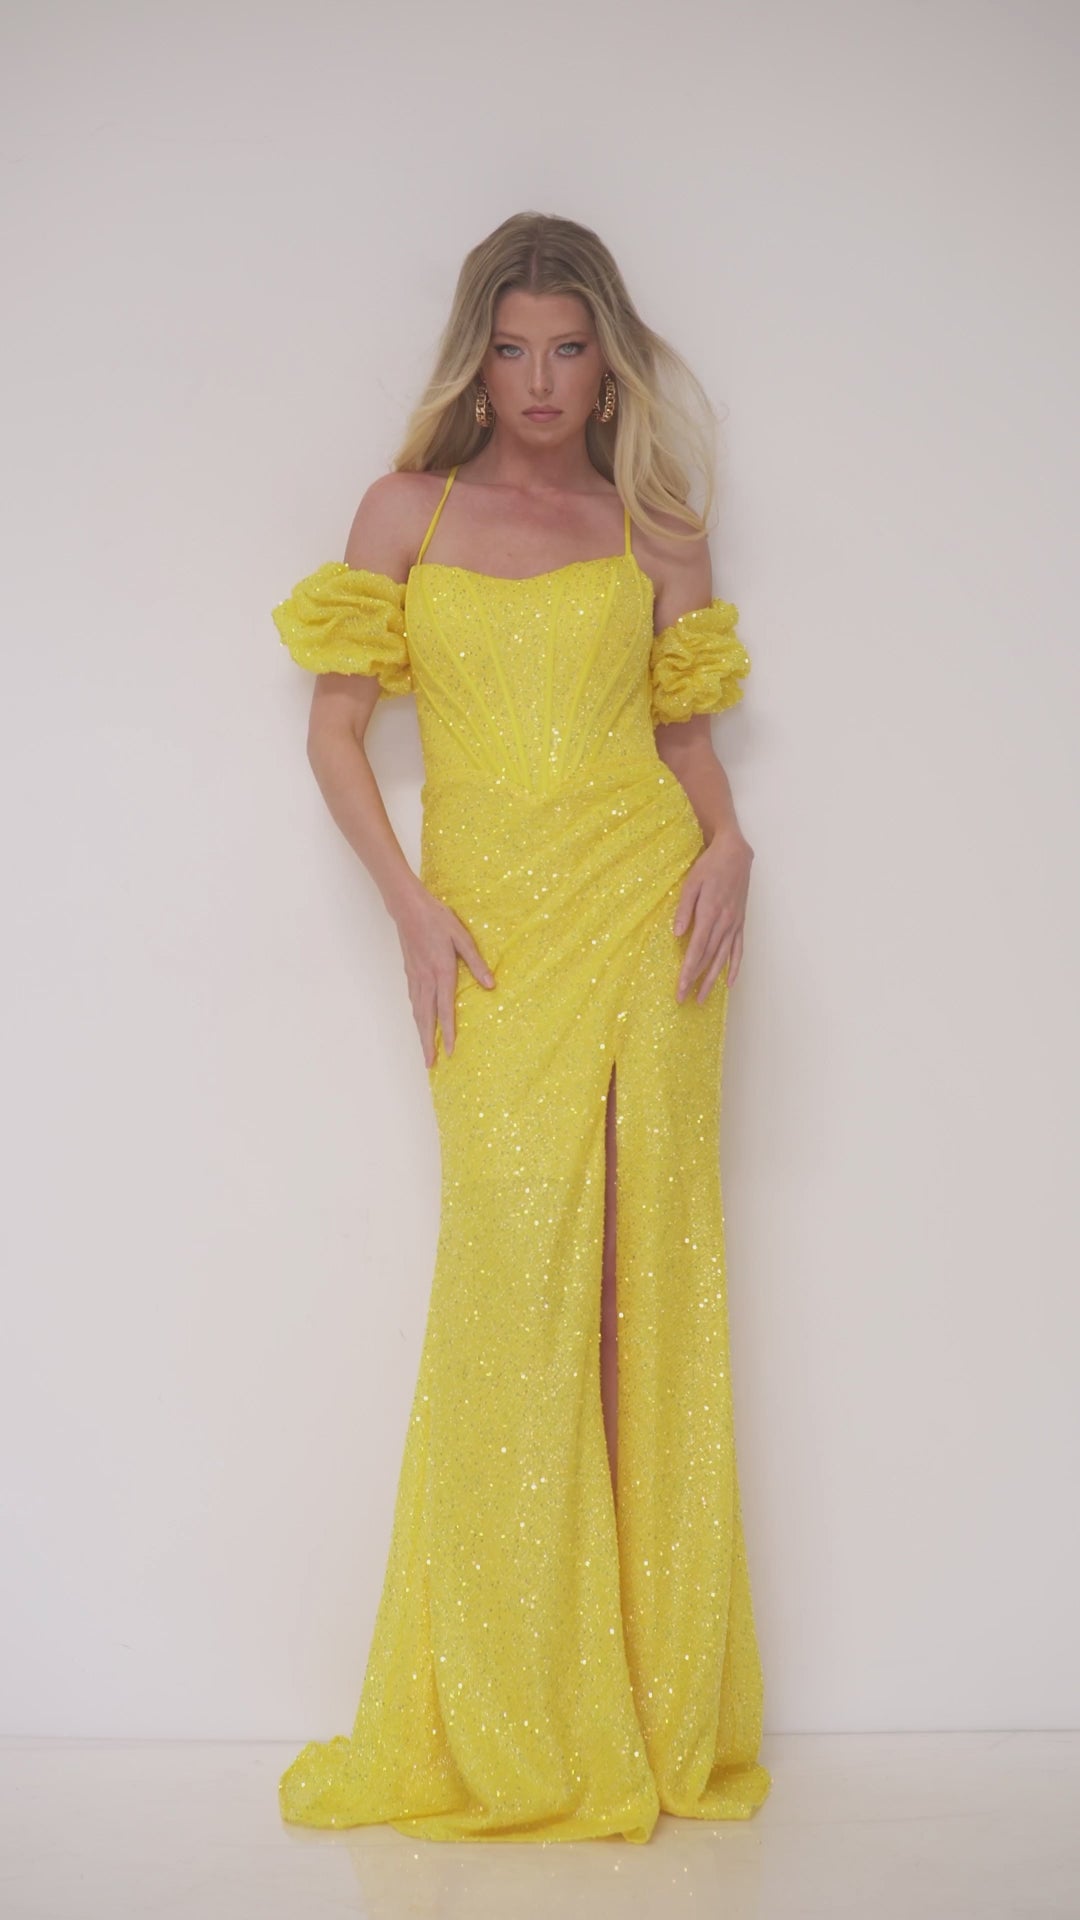 Lucci-Lu-1302-Sweetheart-Neckline-Open-Back-High-Slit-Sequins-Fit-N-Flare-Yellow-Evening-Dress-B-Chic-Fashions-Prom-Dress